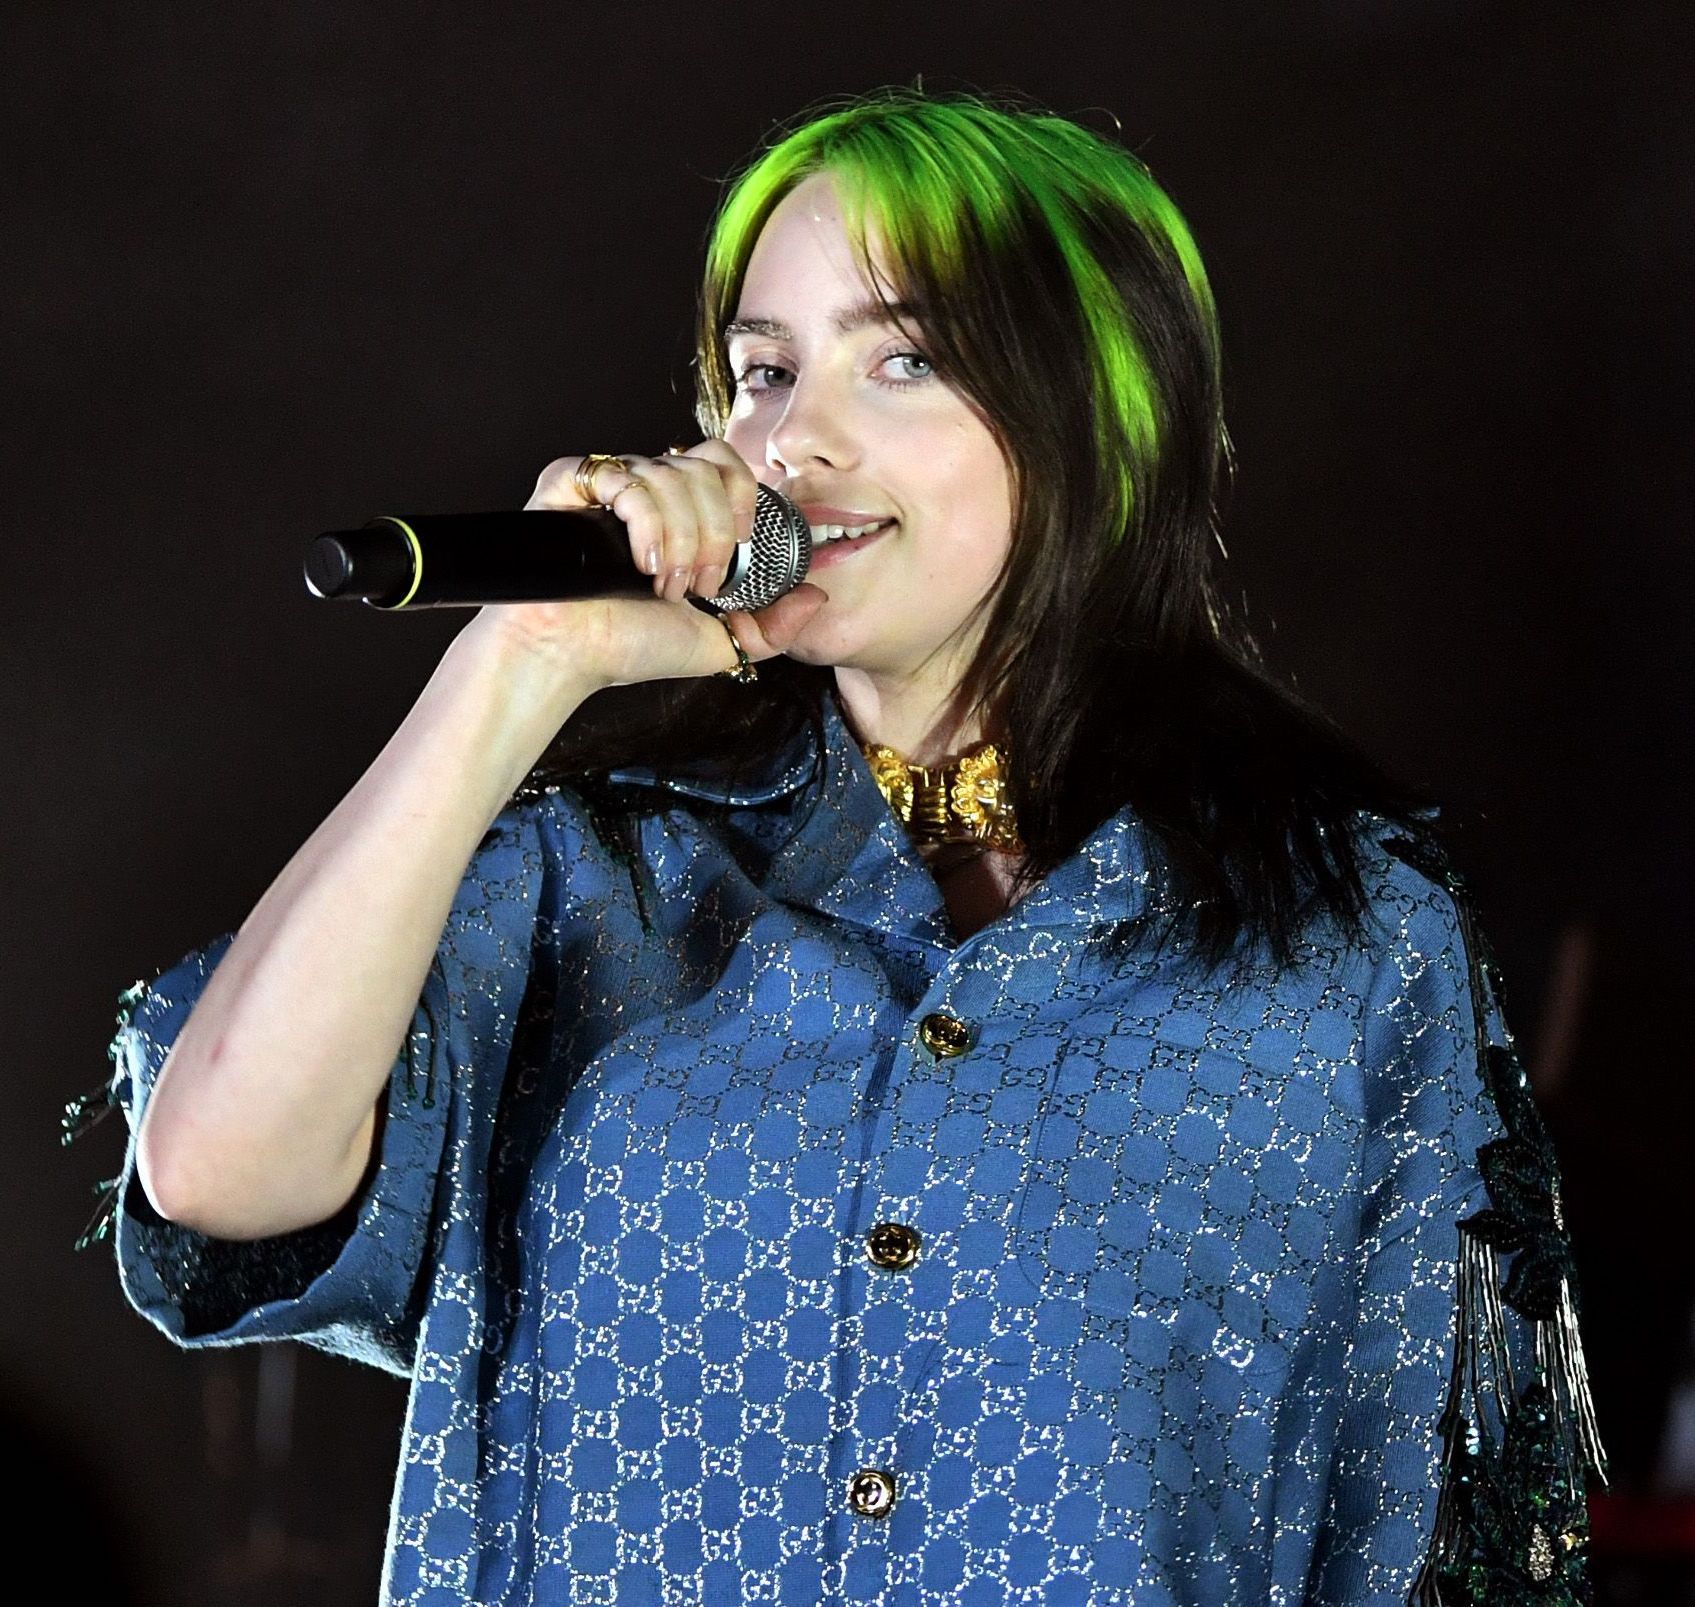 Billie Eilish, with green hair and a blue button-up shirt, stands on stage with a microphone at her mouth, smiling at the camera